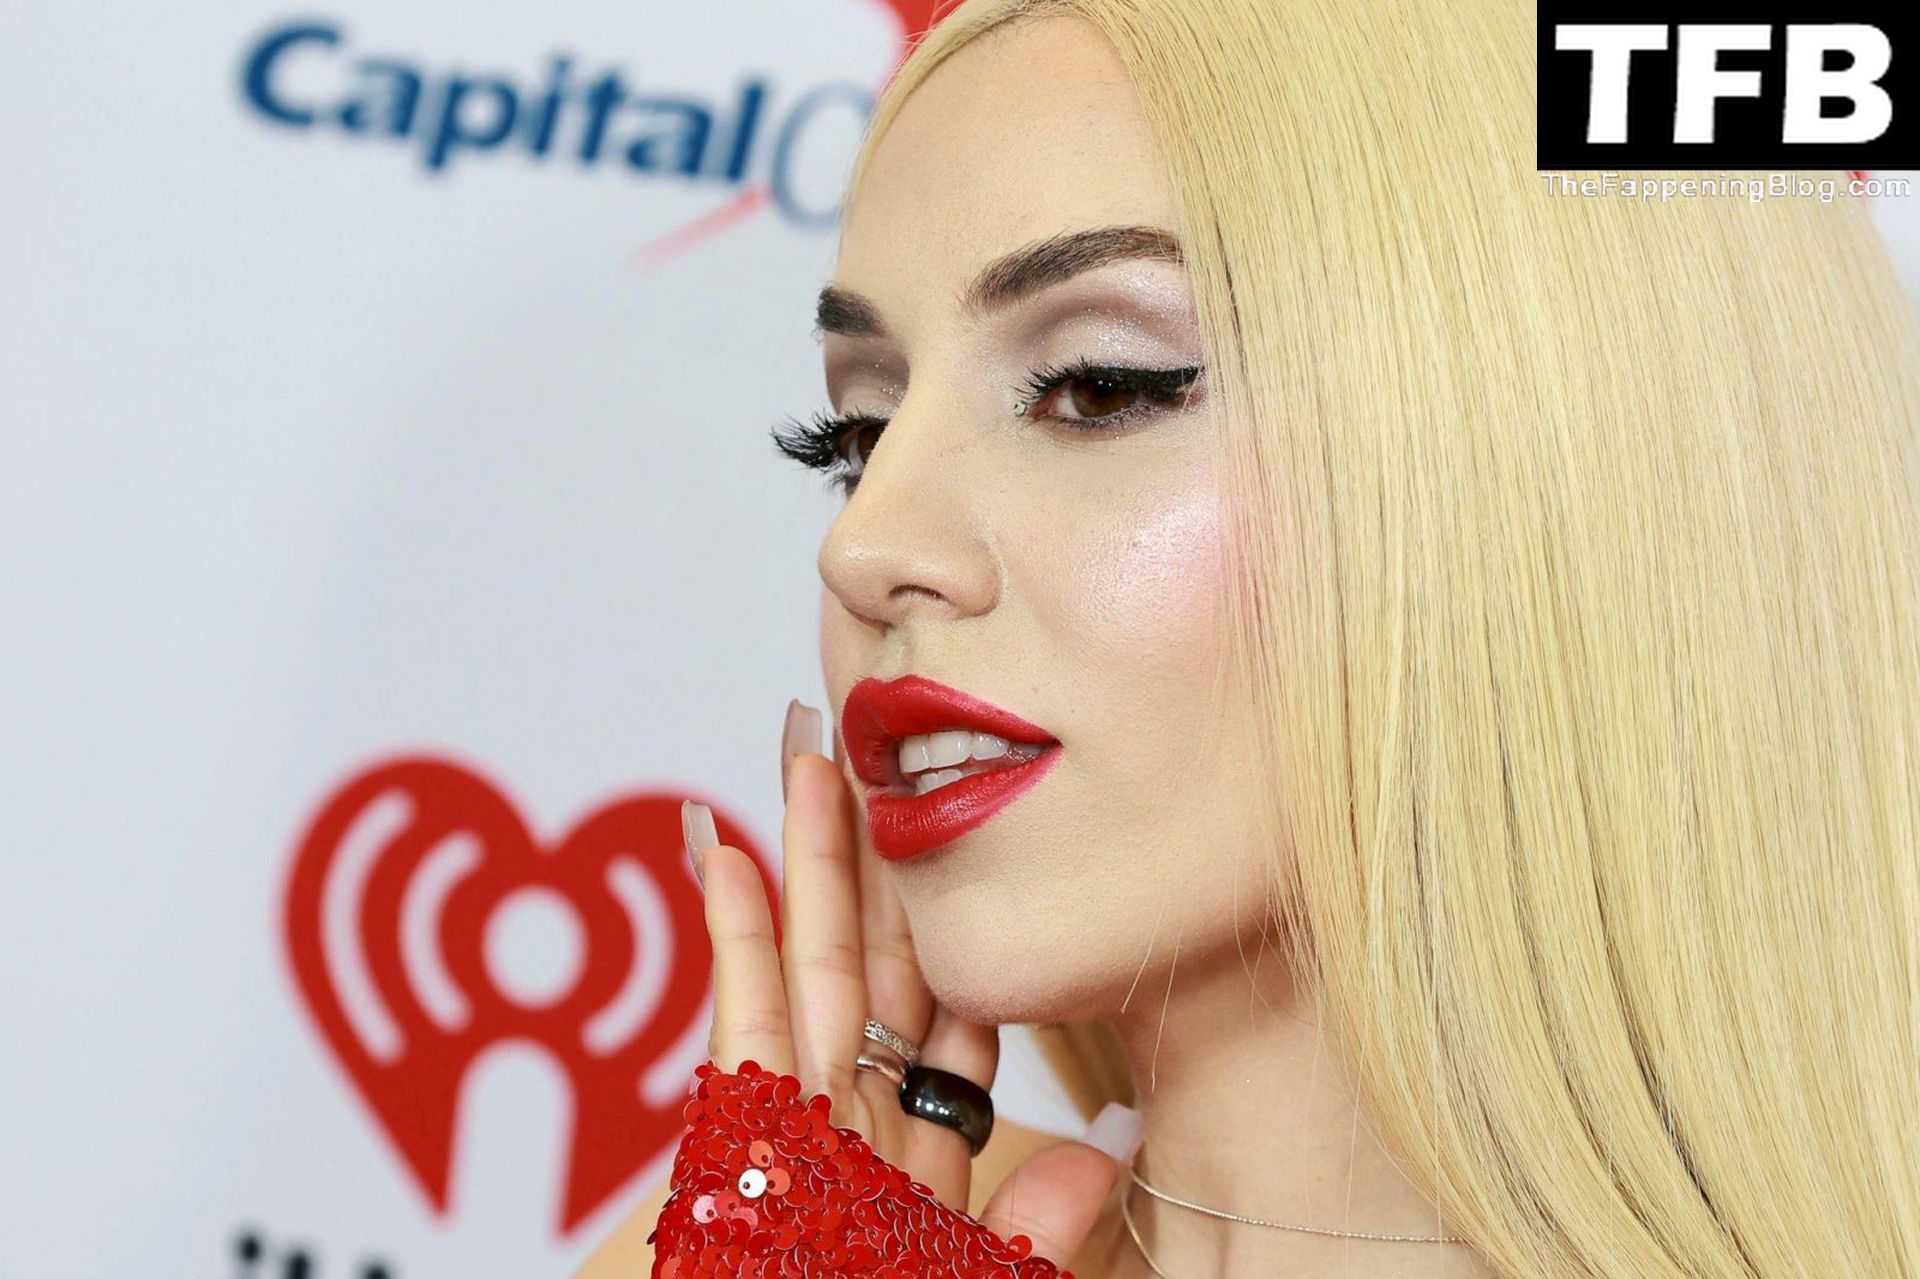 Ava Max Stuns in a Red Dress at HeartRadio Jingle Ball (29 Photos)